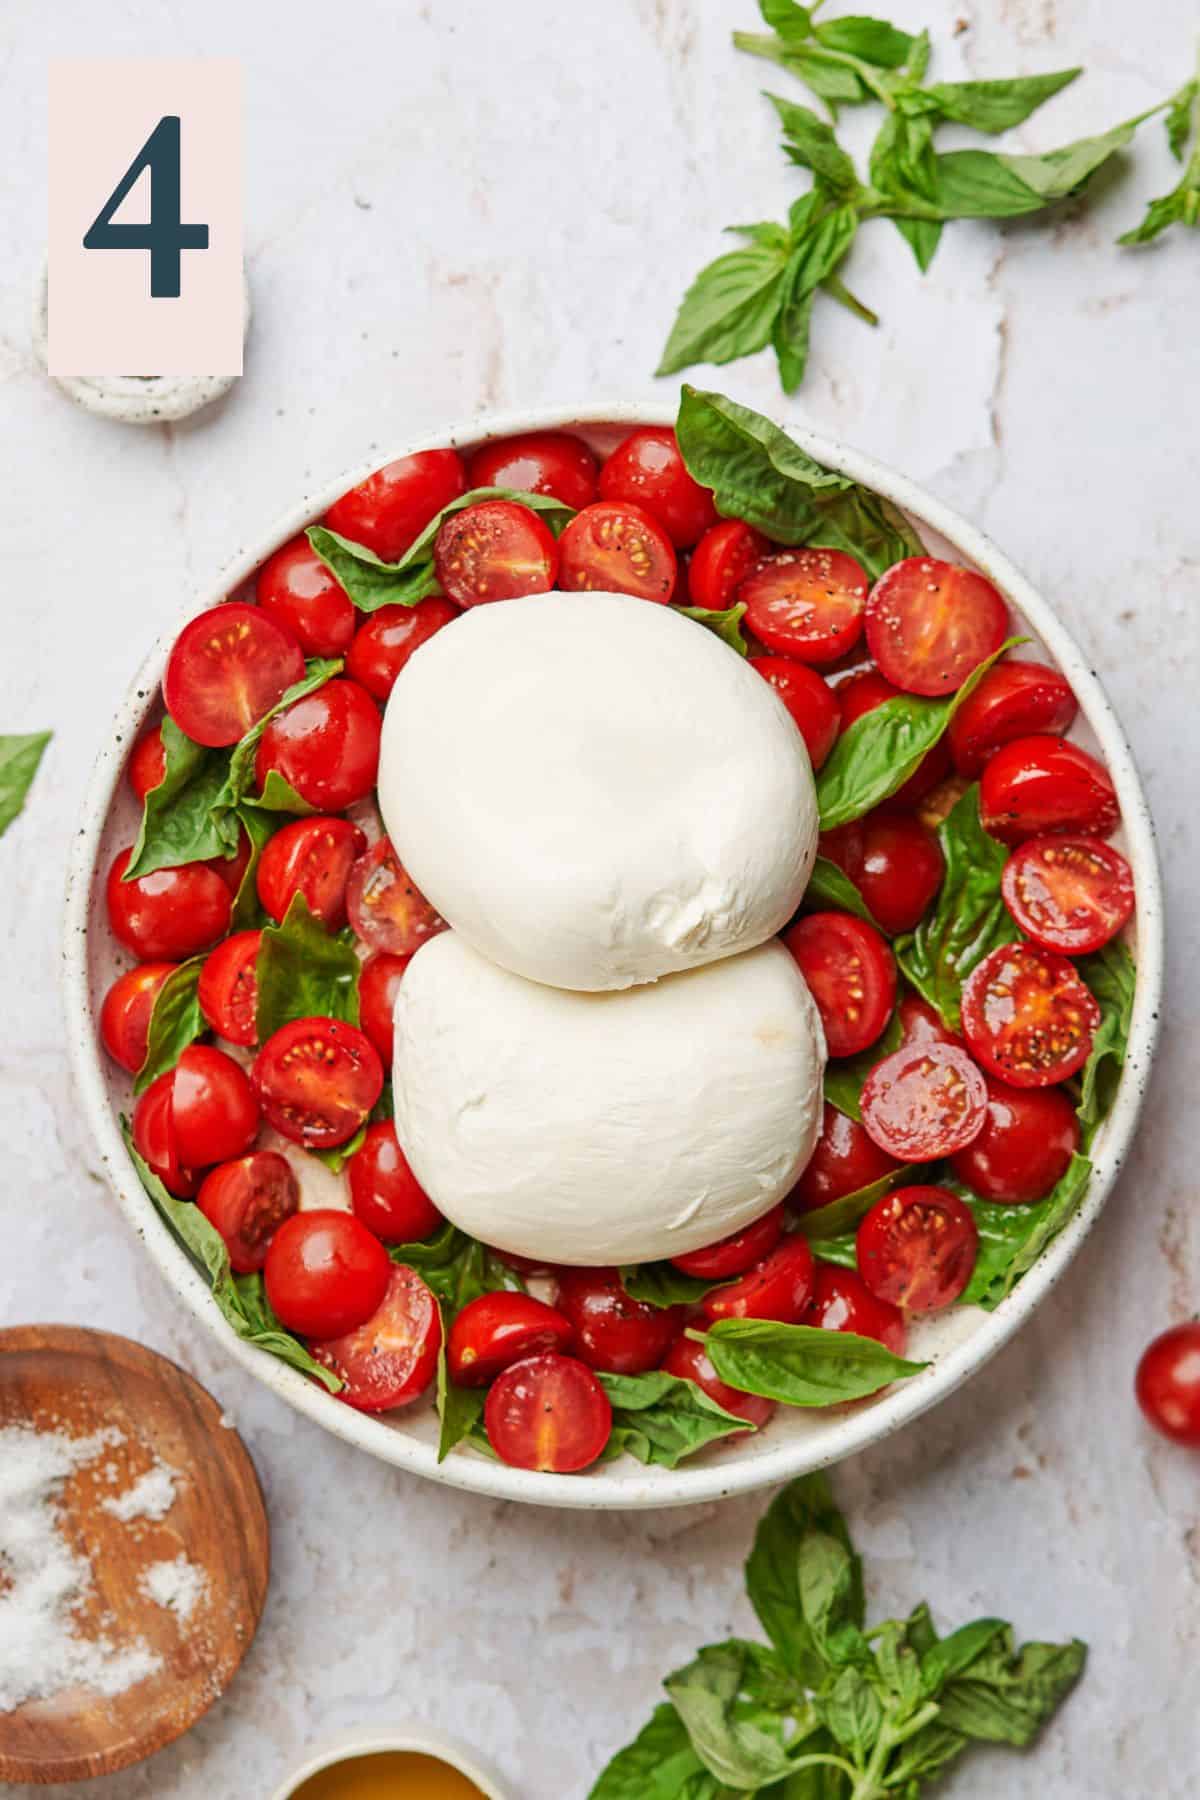 Basil placed in between cherry tomatoes and topped with warm burrata cheese.